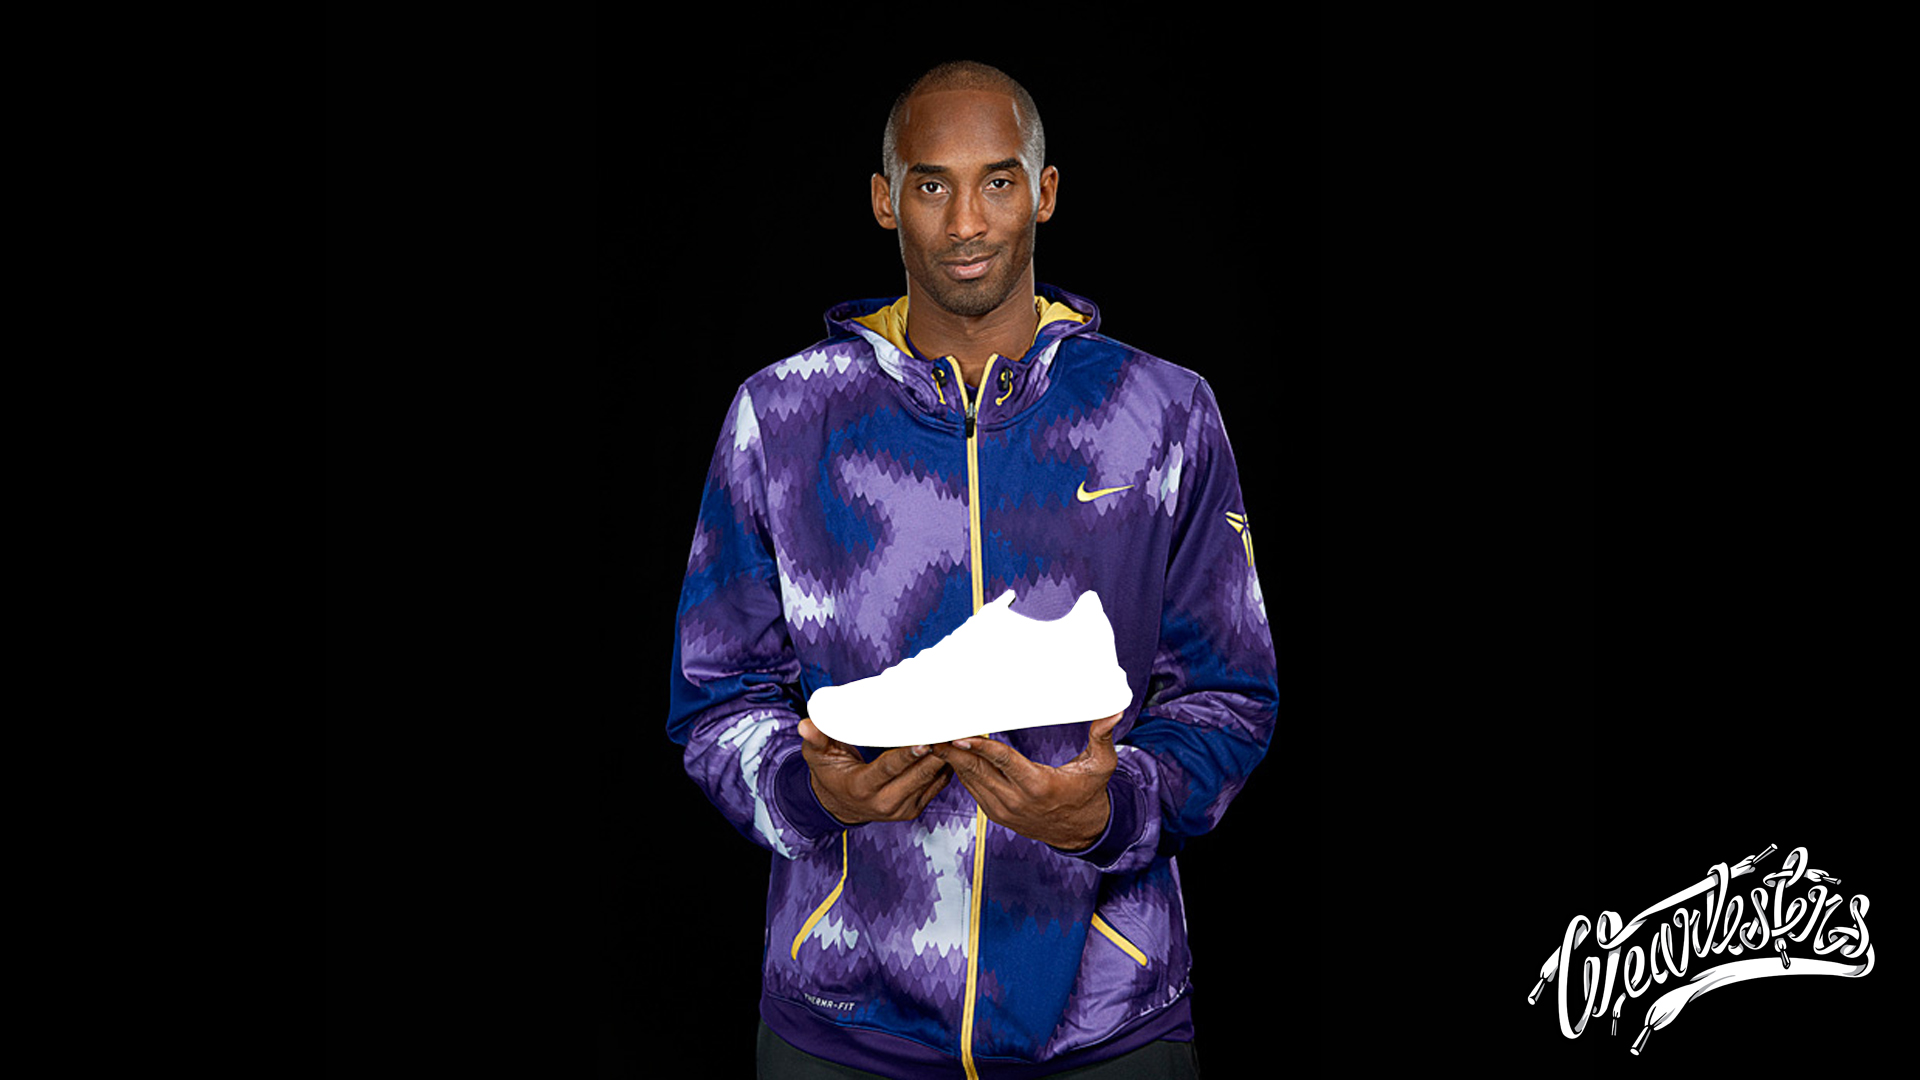 what does ad mean in kobe shoes